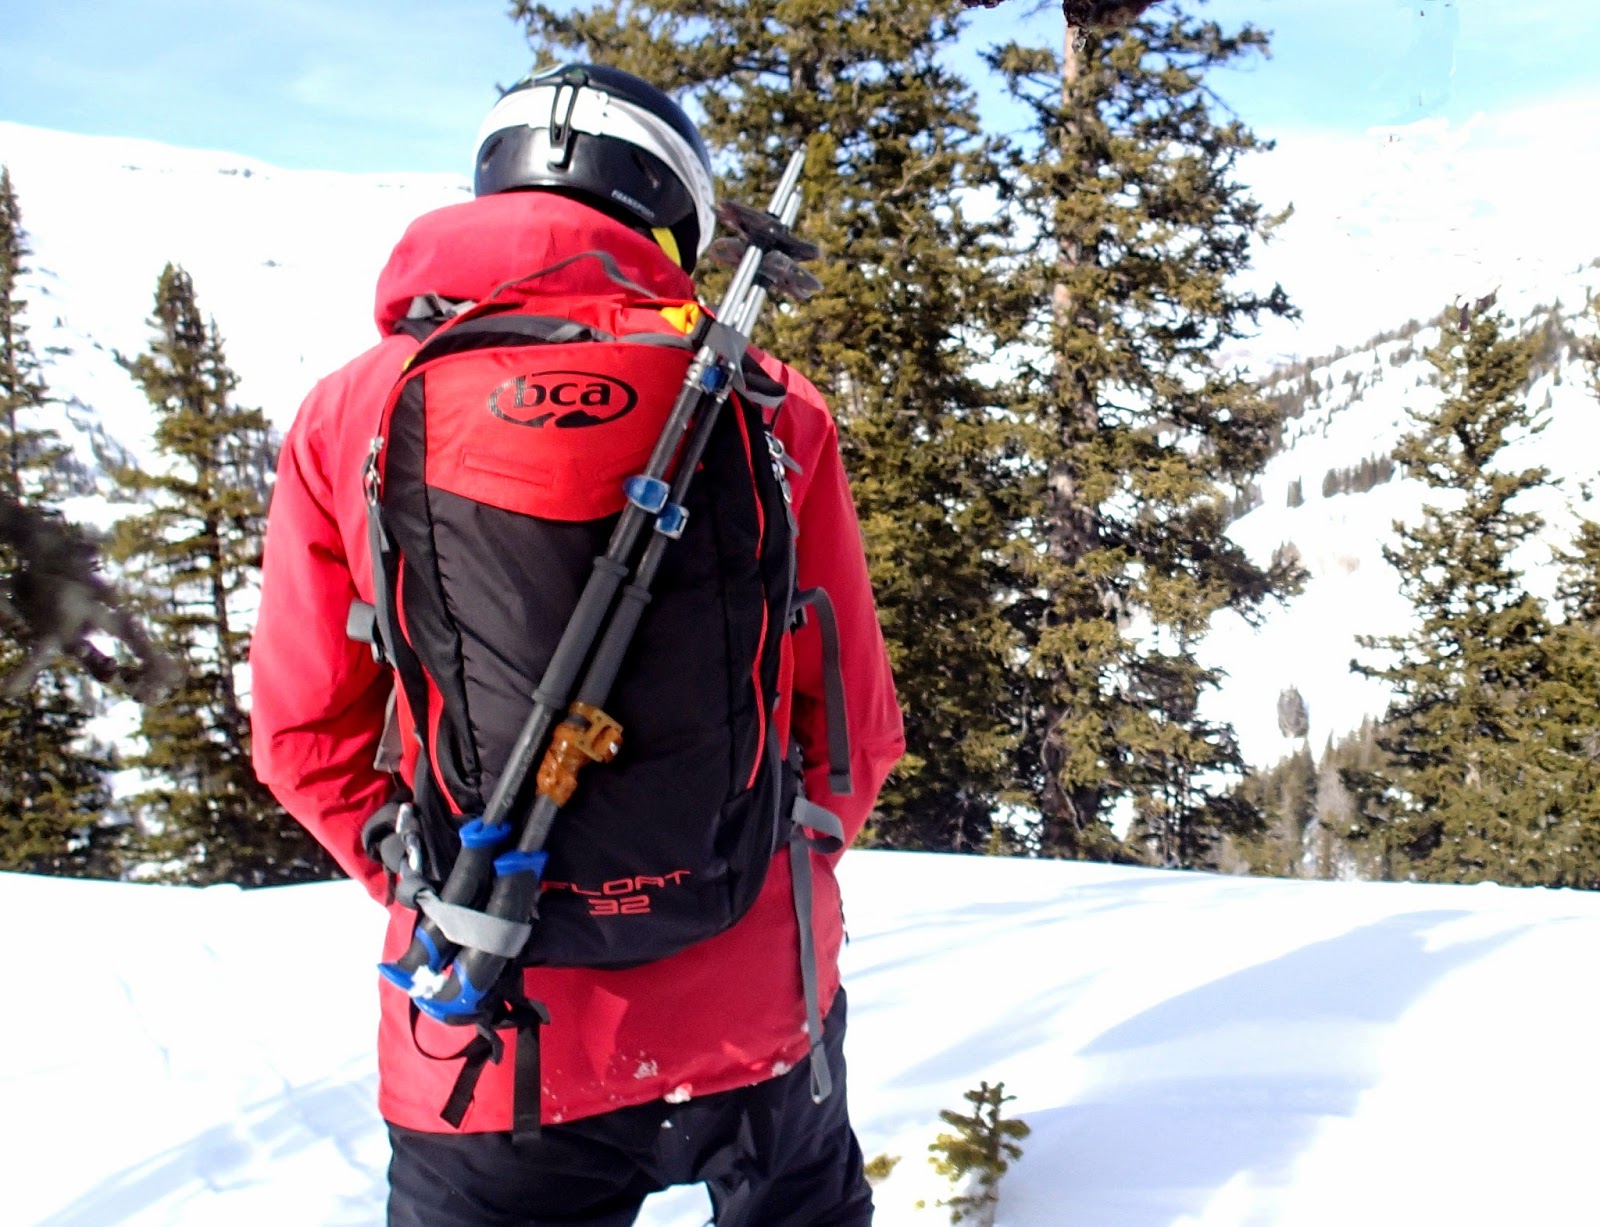 http://www.mountainenthusiast.com/2015/02/backcountry-access-direct2dirtbag.html